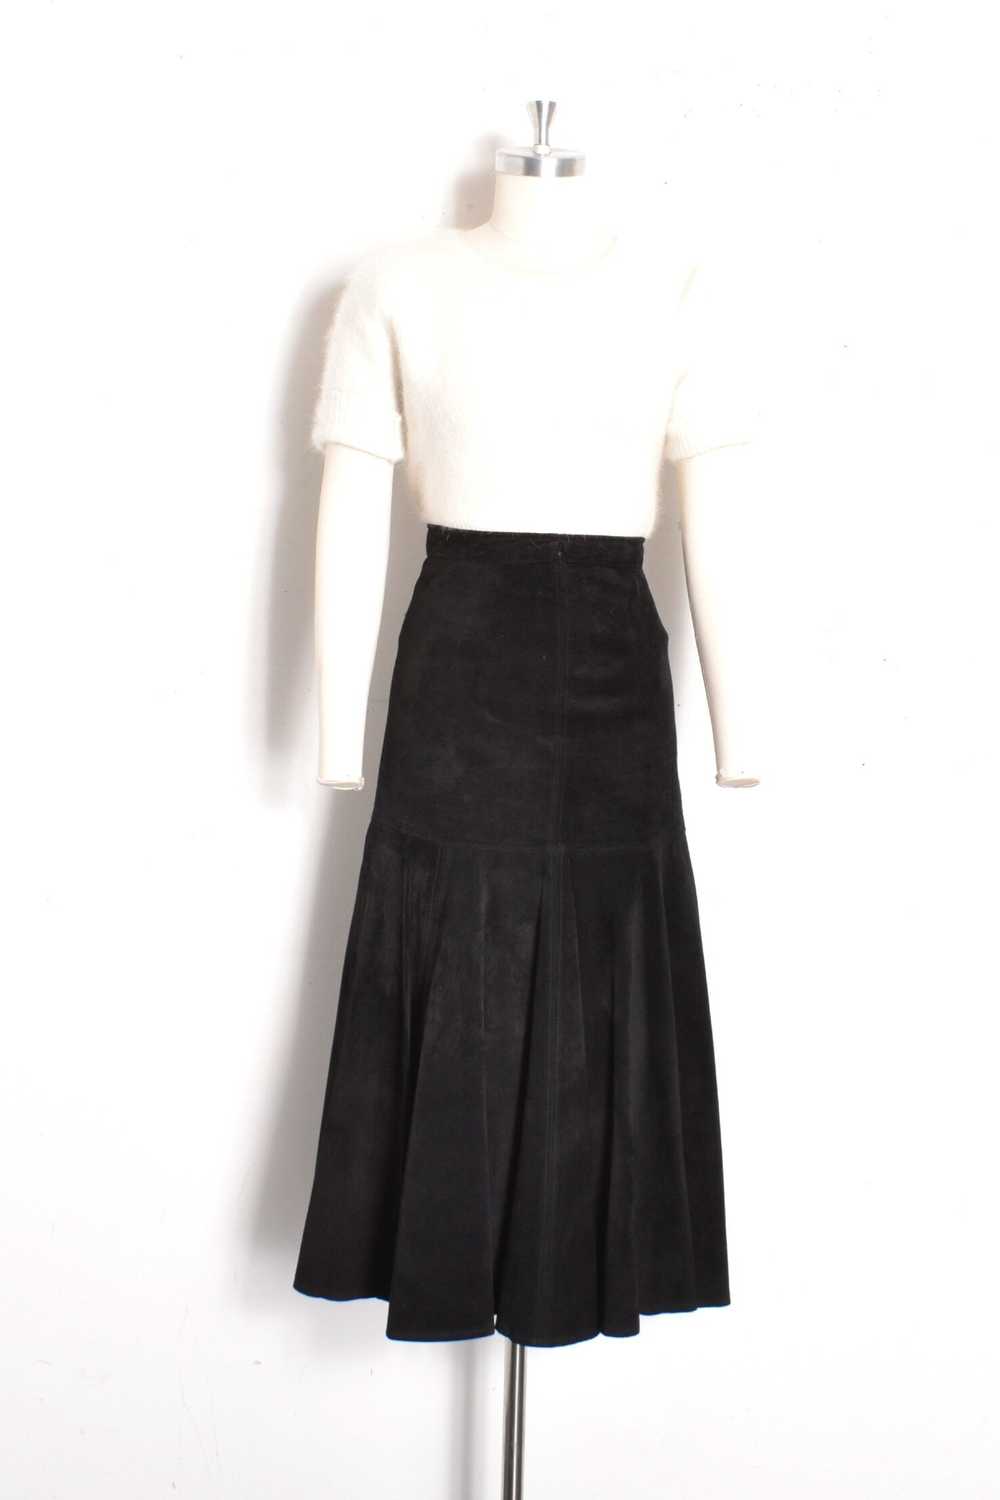 1980s Wool and Leather Skirt-small - image 12